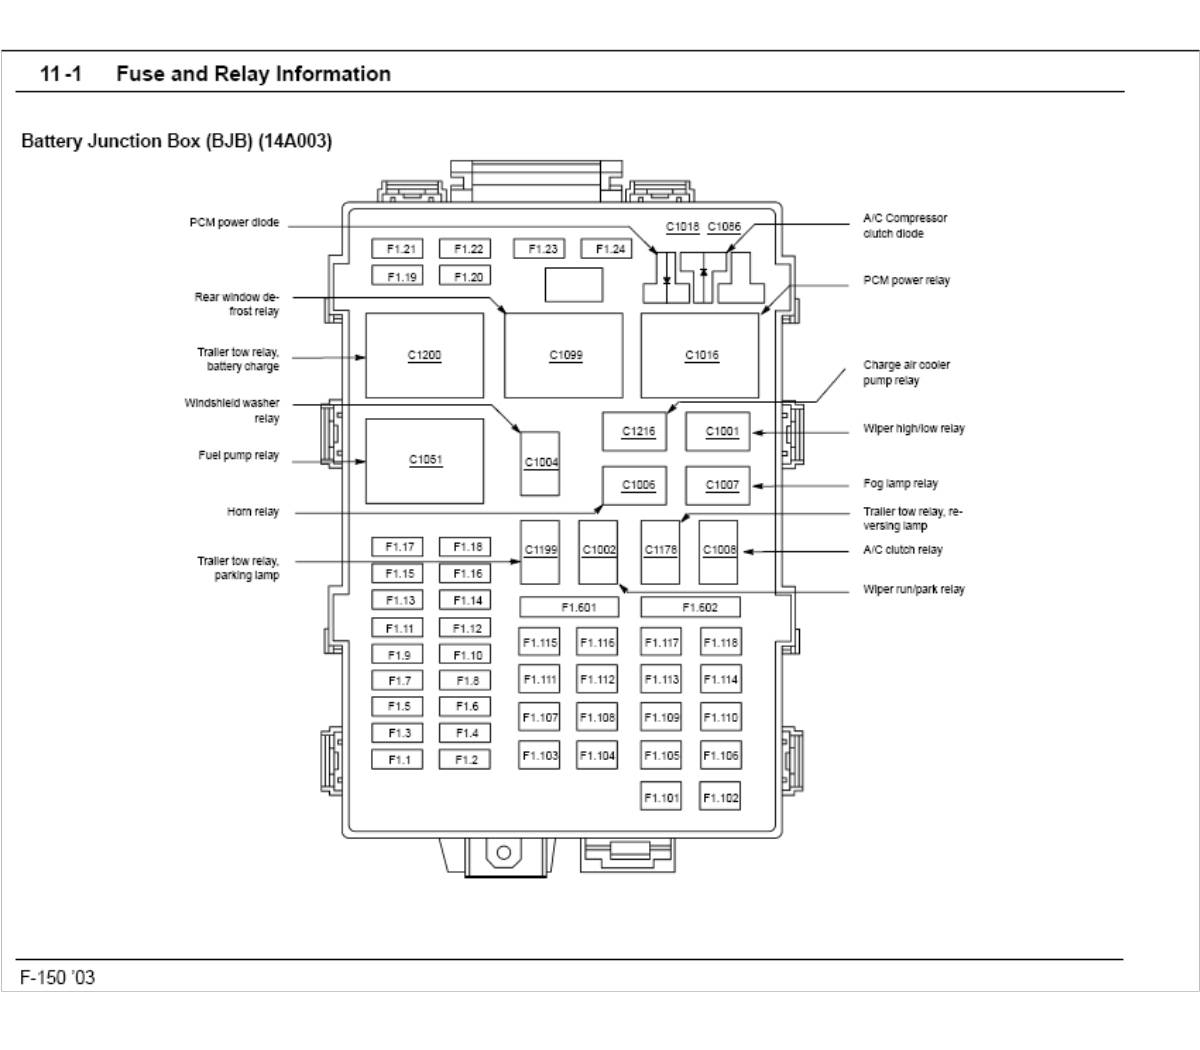 2002 F150 Fuse Box Diagram Fuse Box Diagram For 2000 Ford Truck Wire Management Wiring Diagram